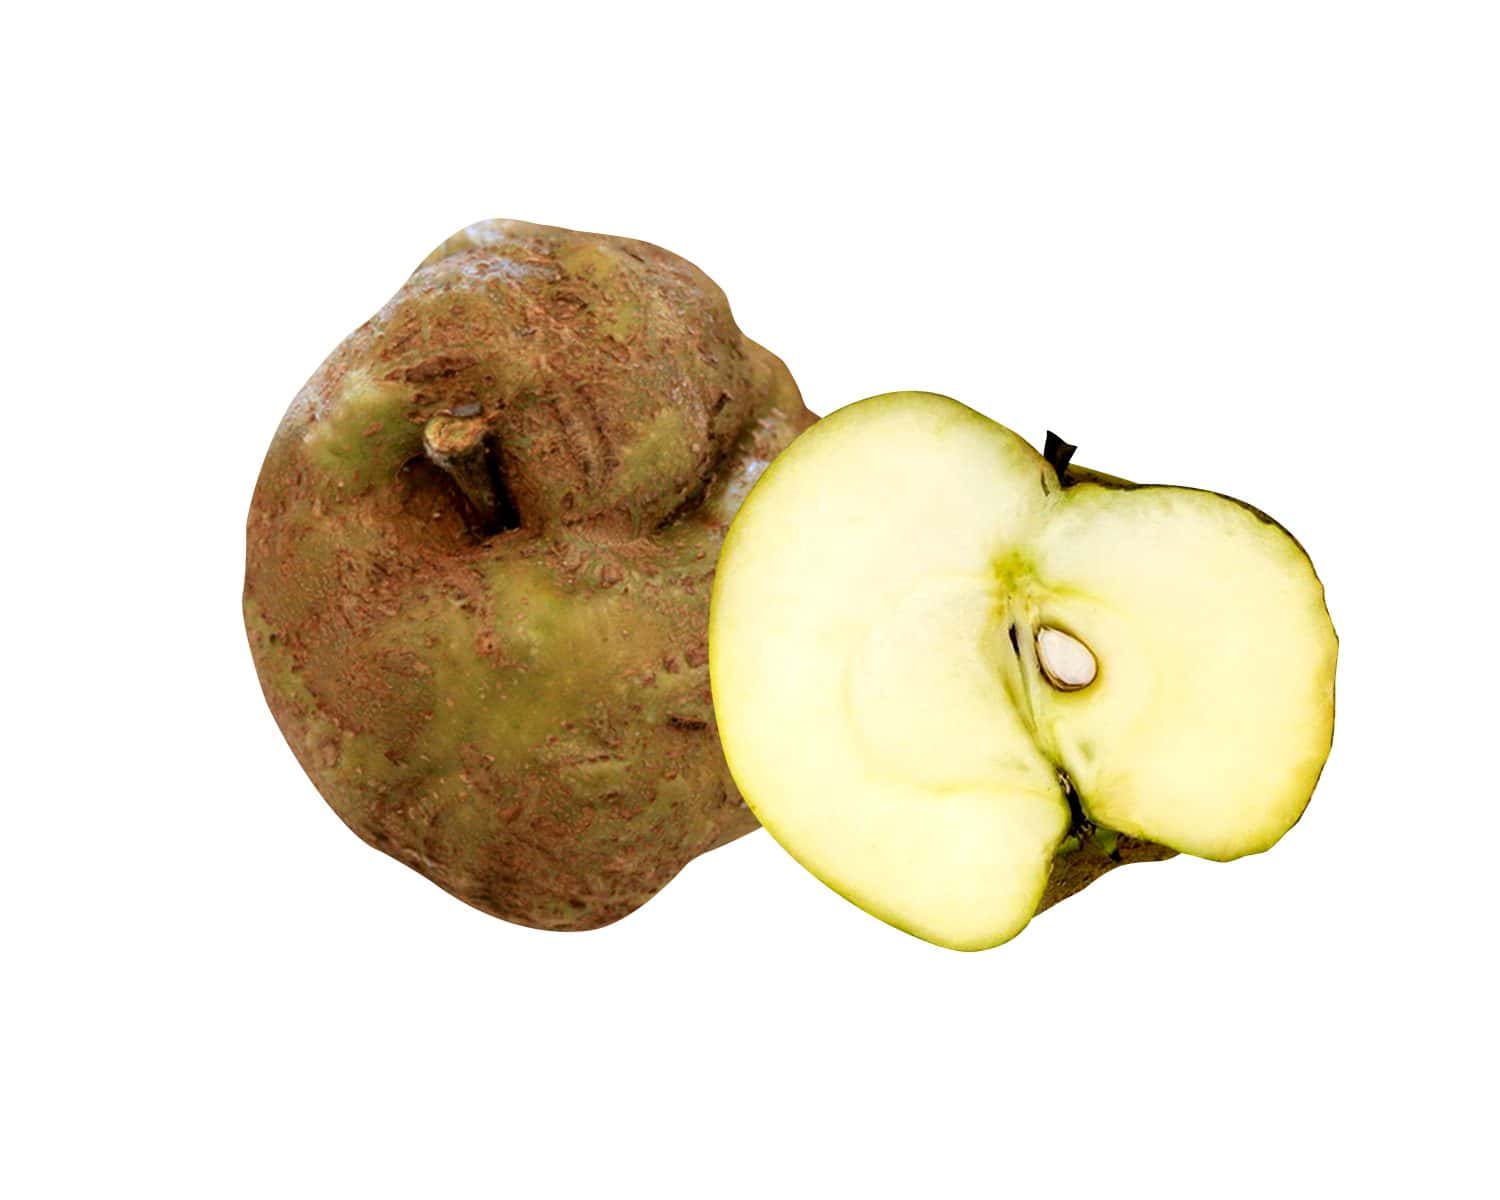 The Knobby Russet, also known as Knobbed Russet, Winter Russet, Old Maids, and Winter Apple, is a large green and yellow apple cultivar with a rough and black russet.